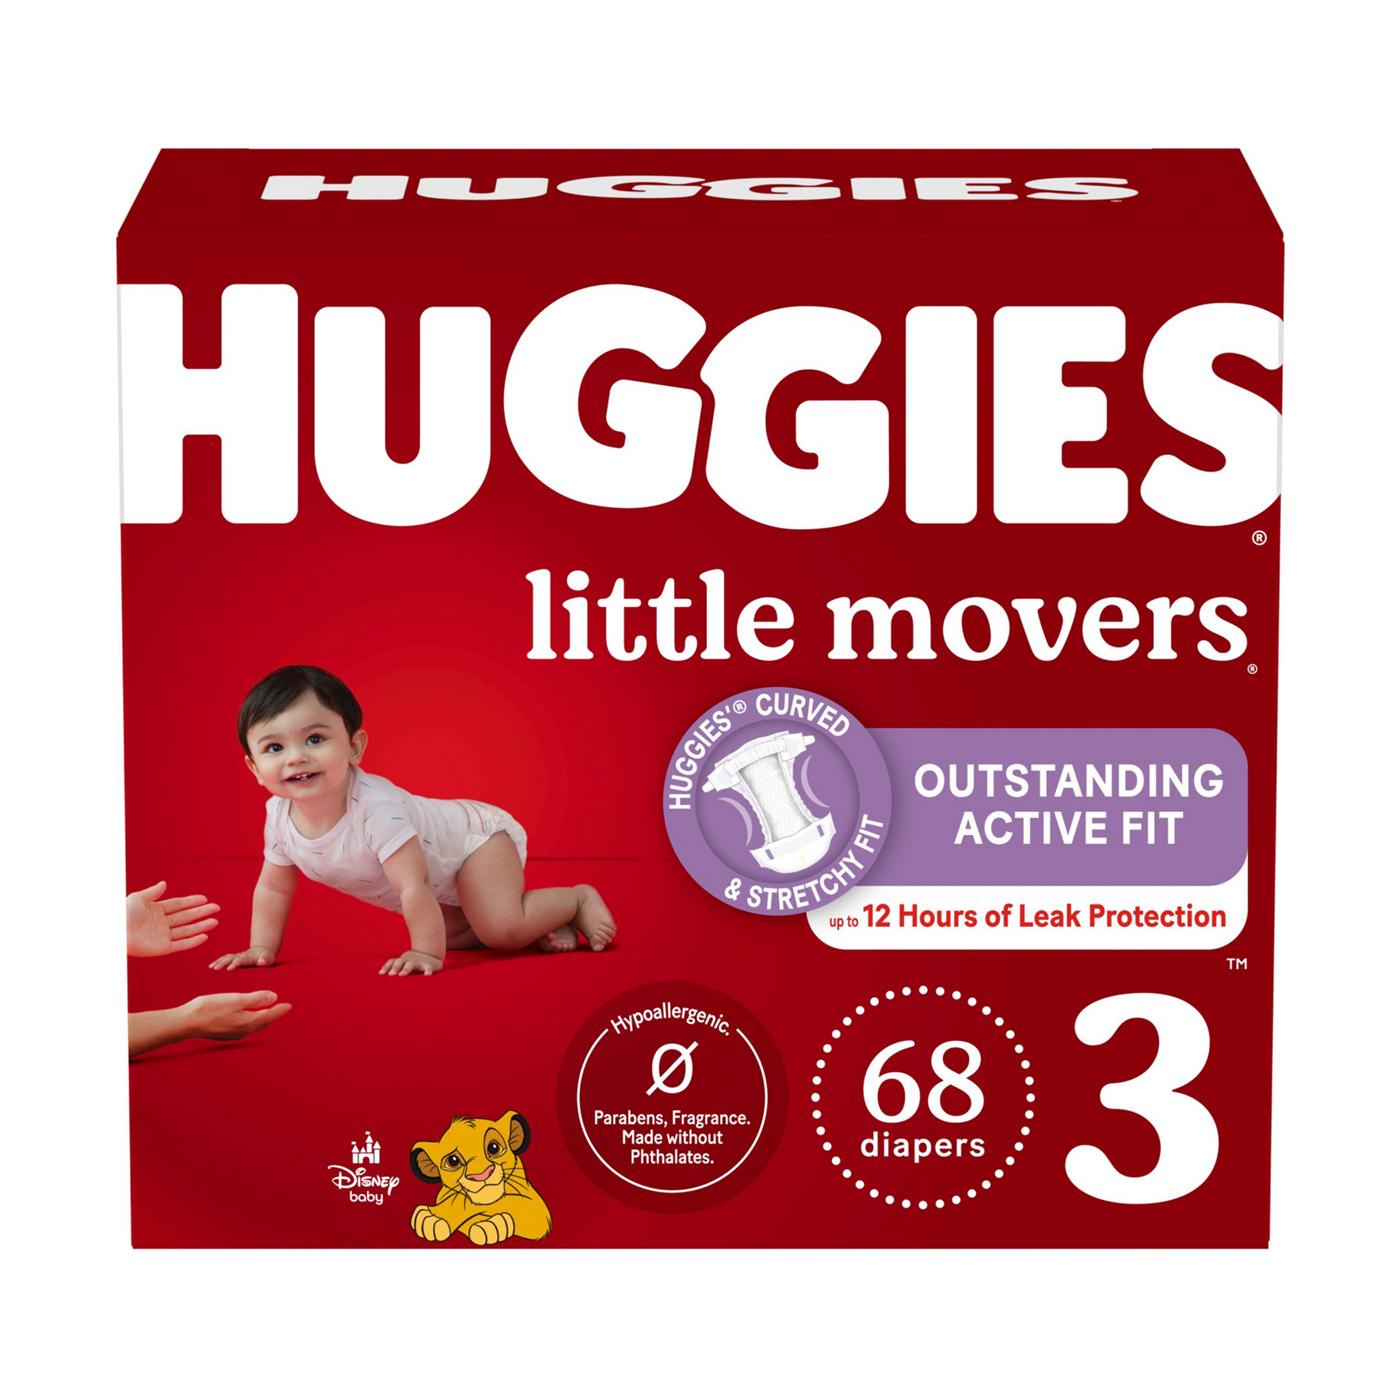 Huggies Little Movers Diapers, Size 3, 1 Month Supply